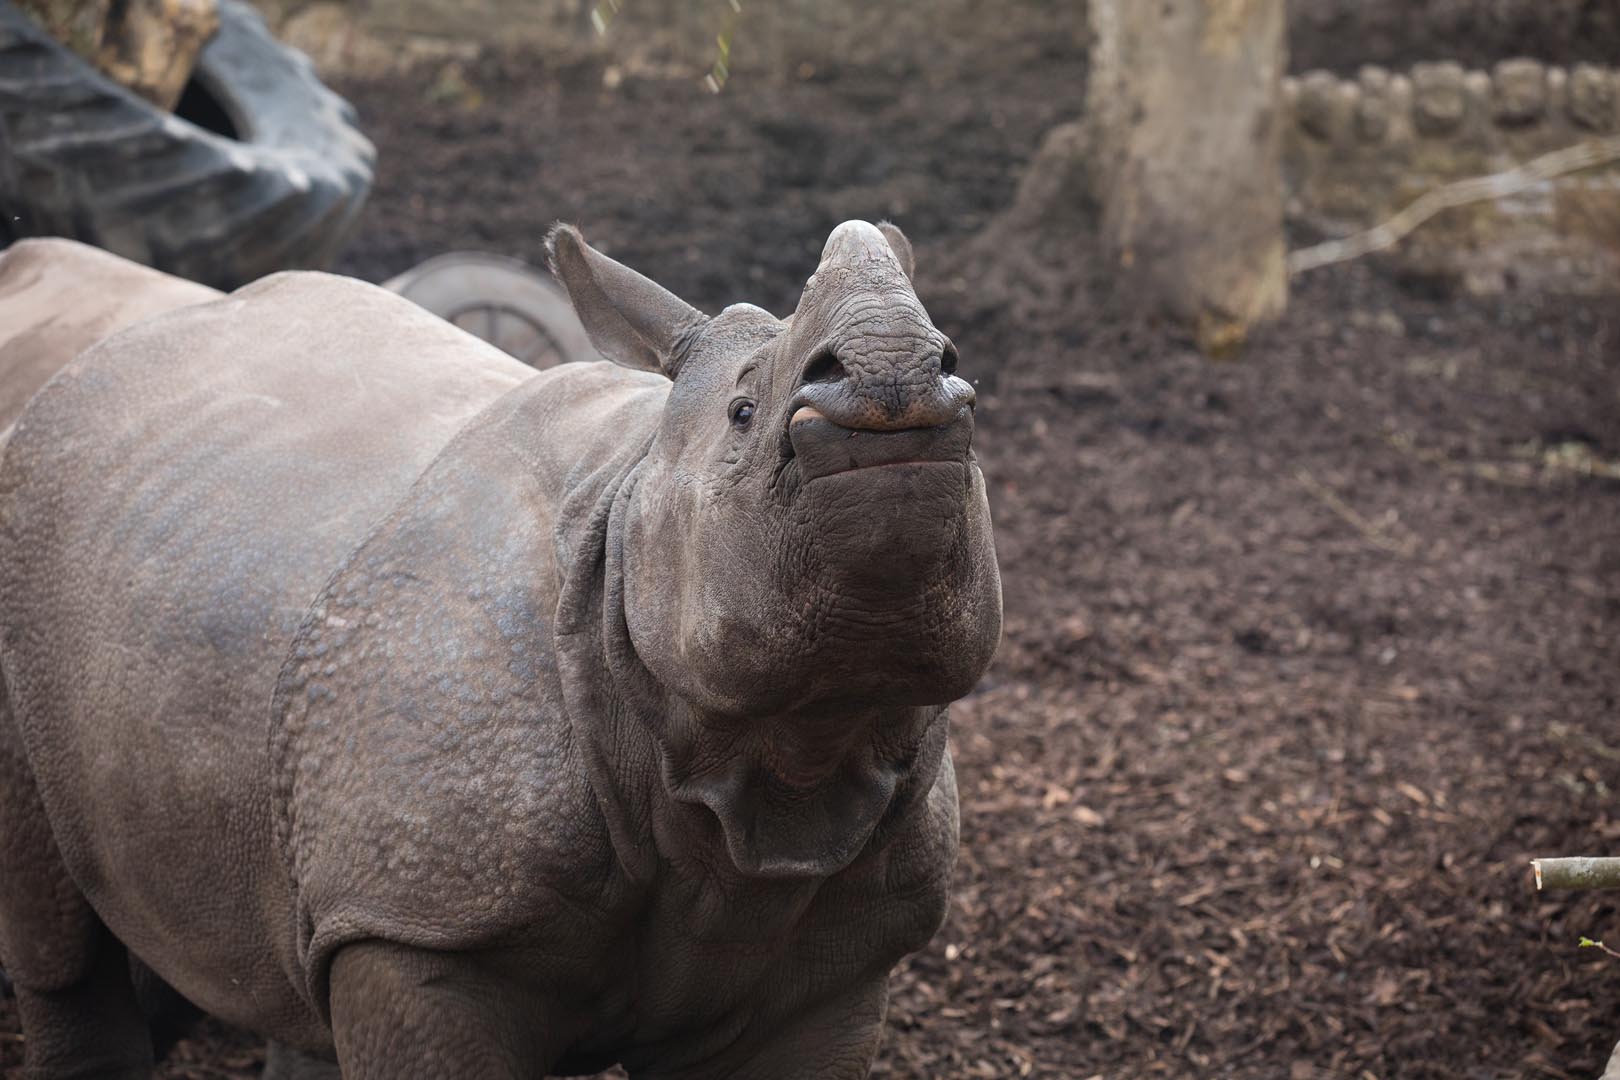 Greater one horned rhinoceros in enclosure facing camera looking upwards Image: SIAN ADDISON 2019